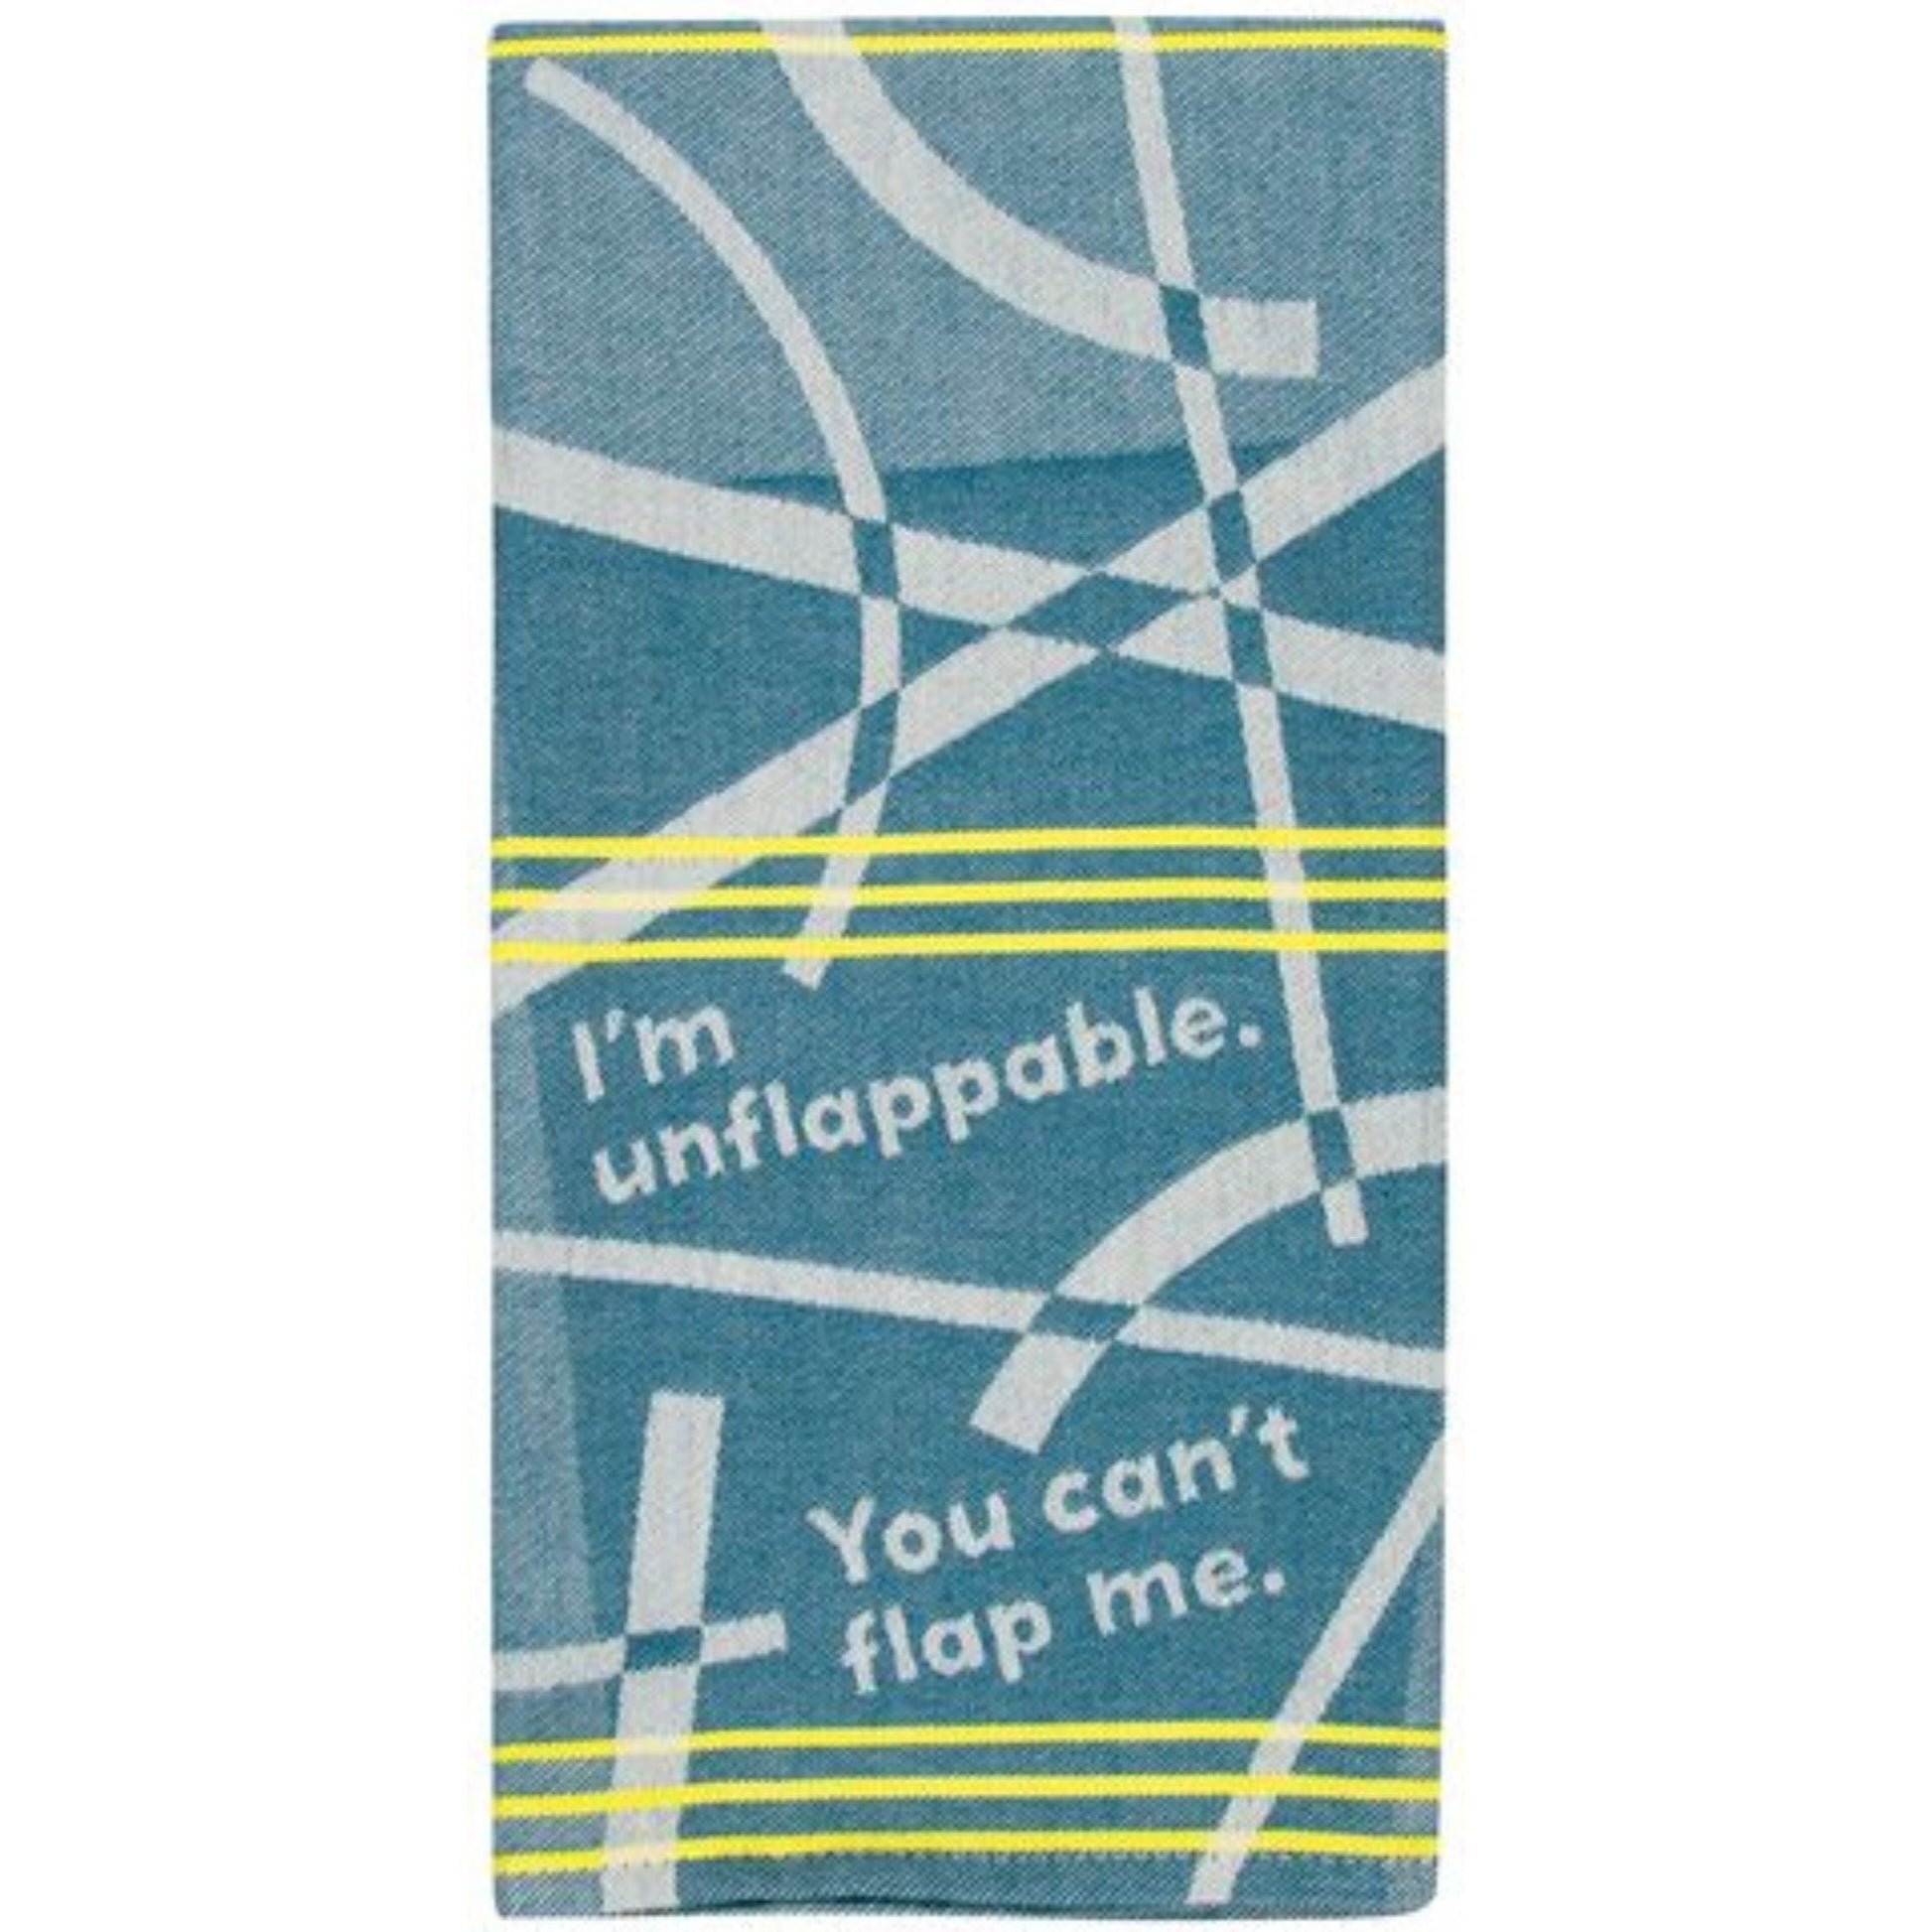 I'm Unflappable. You Can't Flap Me Woven Dish Cloth Towel | Kitchen Tea Towel | 21" x 28"